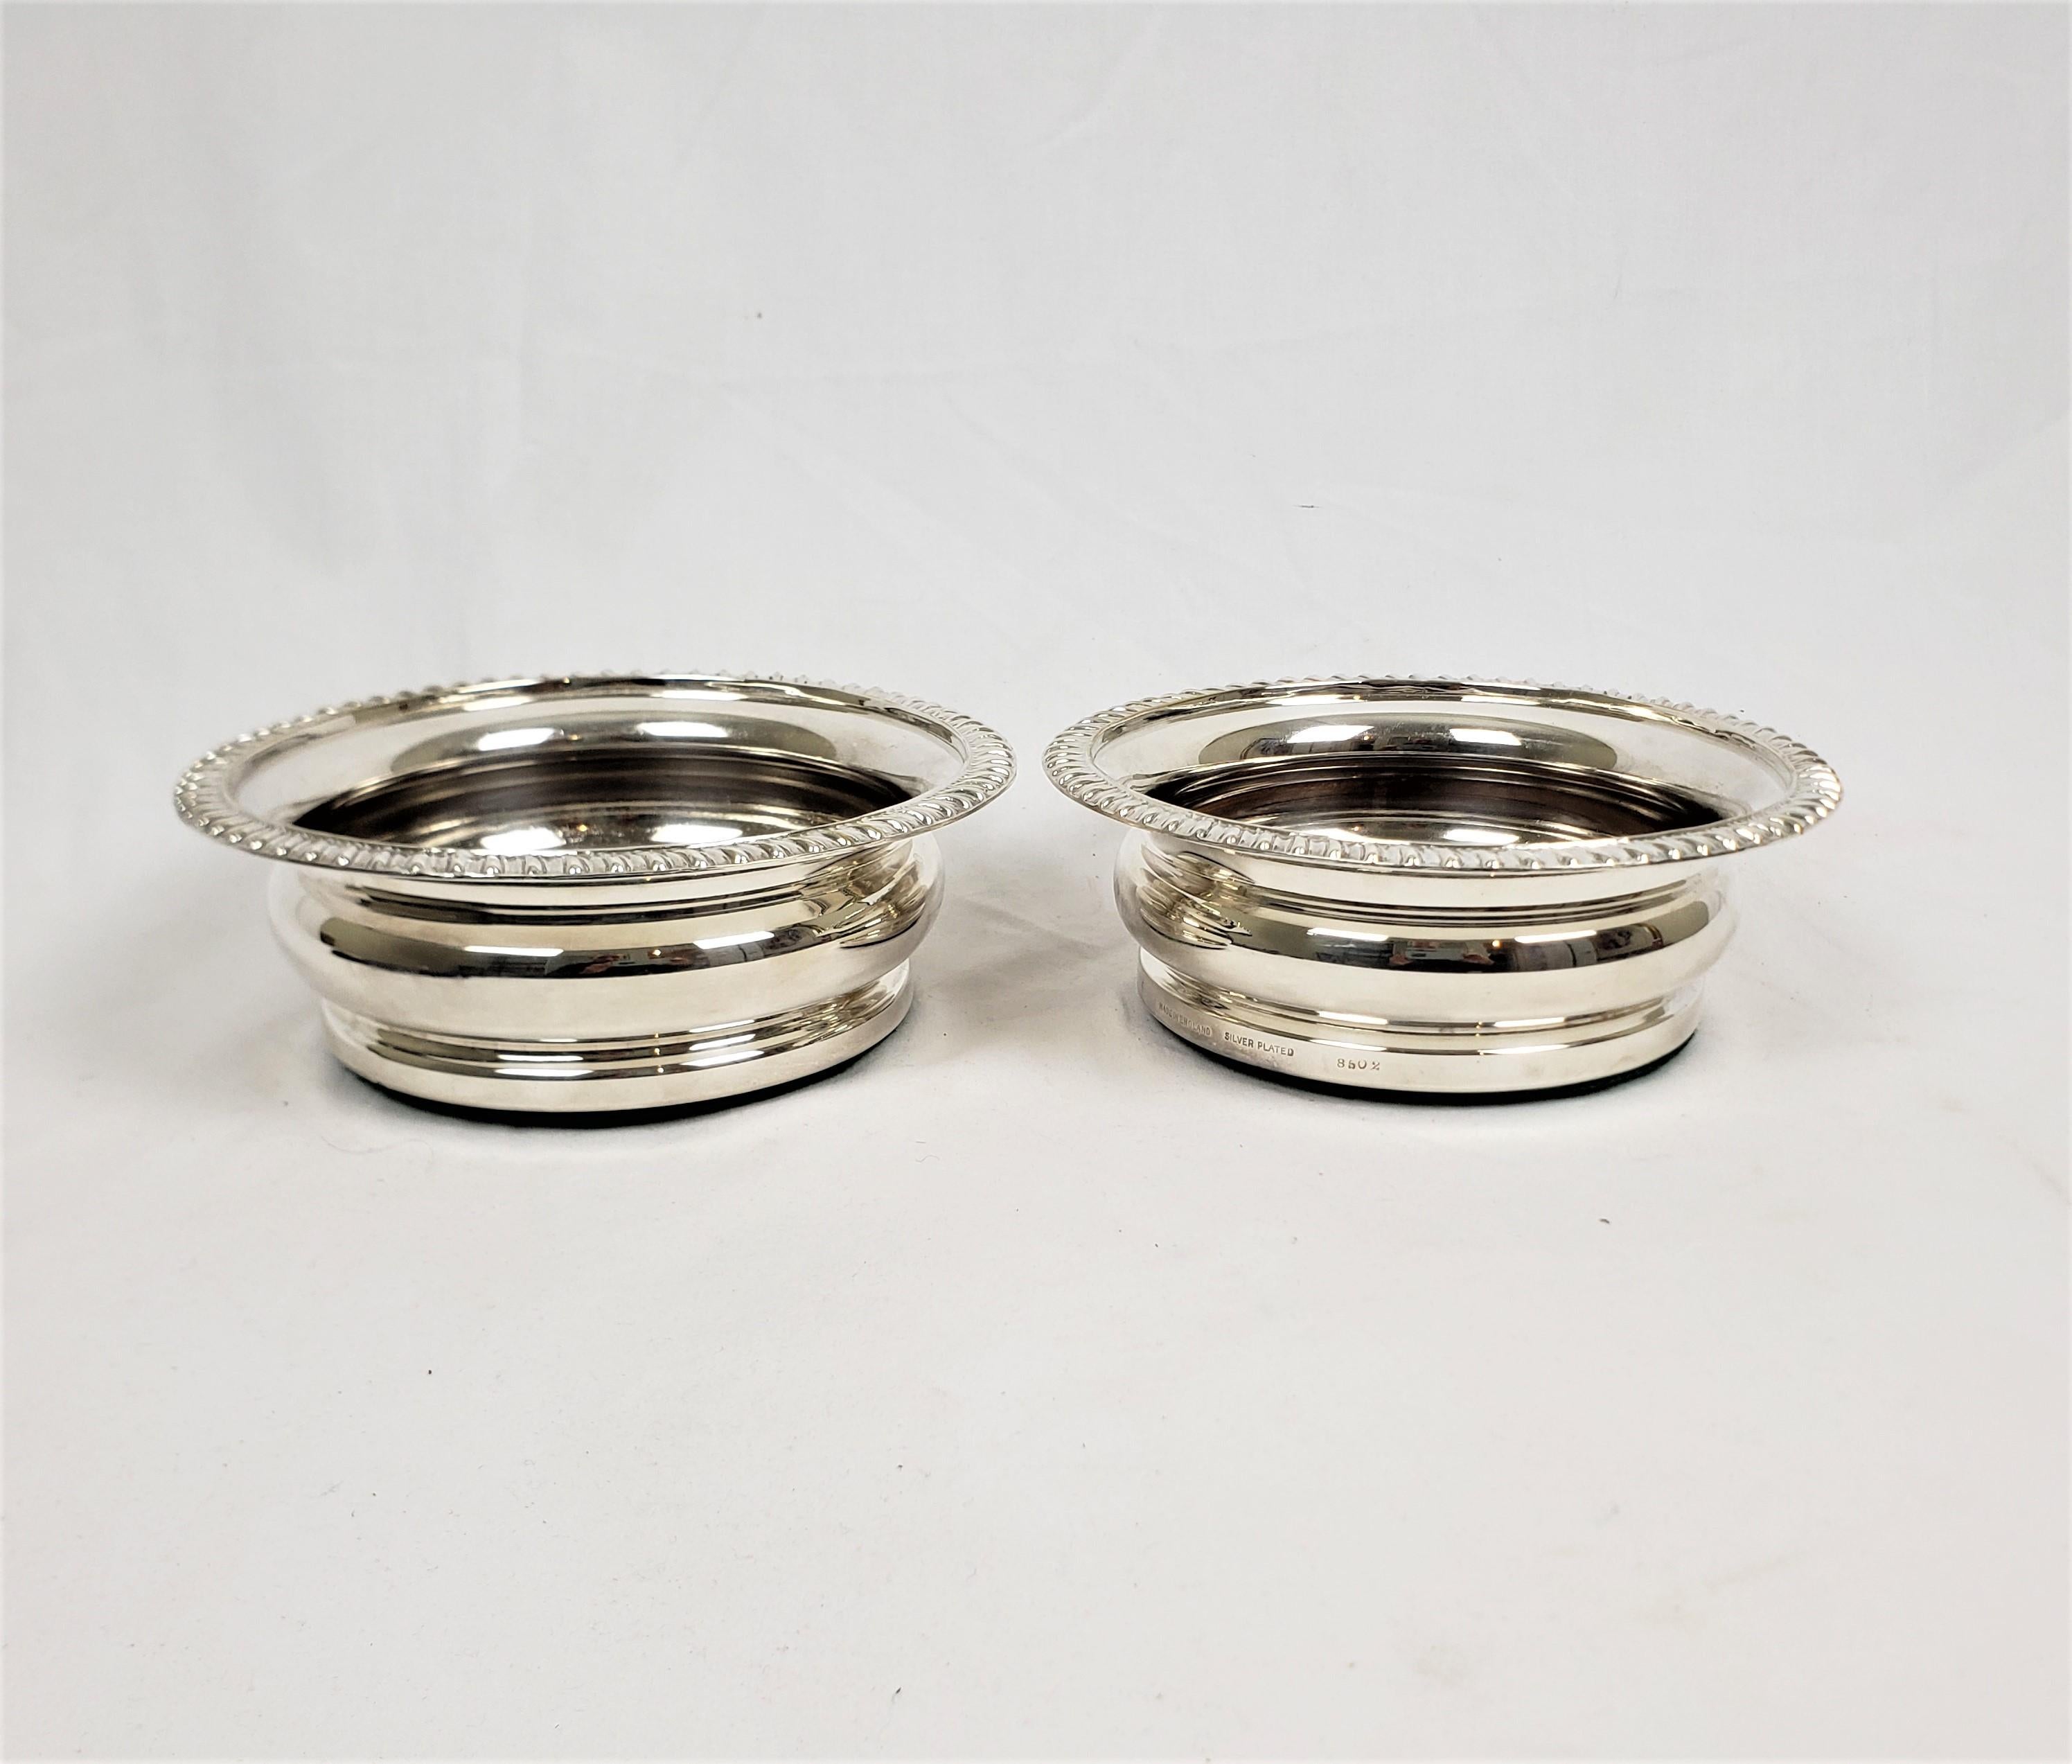 20th Century Pair of Antique English Silver Plated Bottle Coasters with Turned Wooden Inserts For Sale